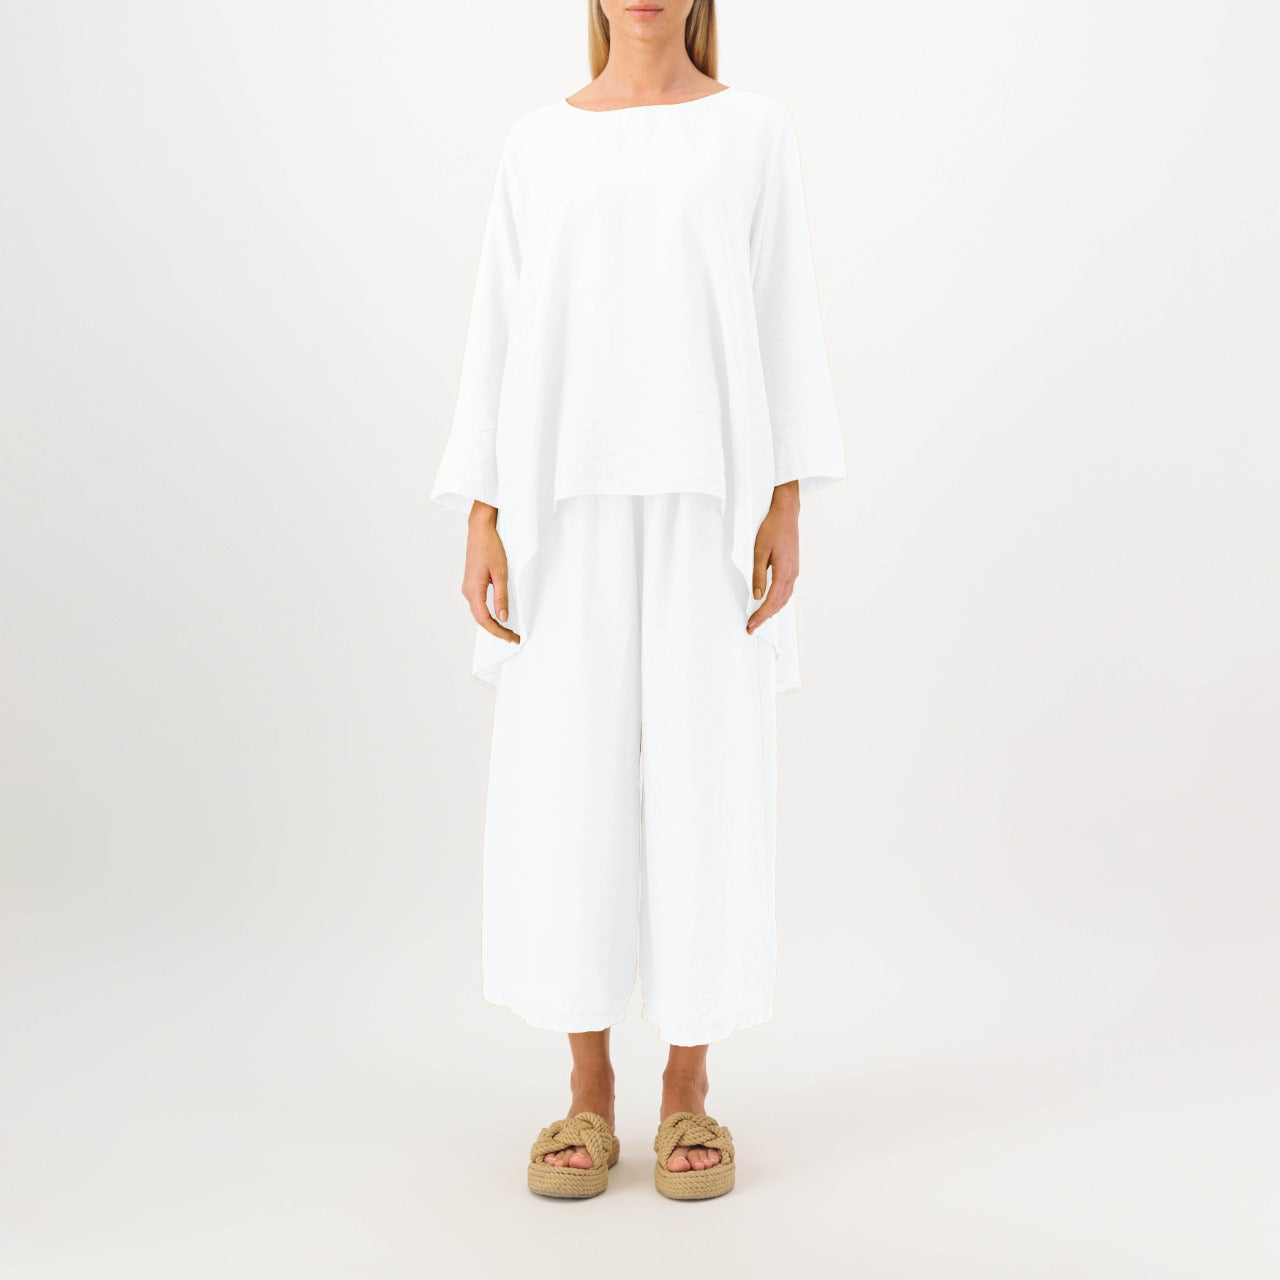 The White Set Outfit  -  All Day Closet Set of 2 - Comfortable style in attractive colors - -  arabian outfit - casual setcasual set - all day outfits - closet fashion store